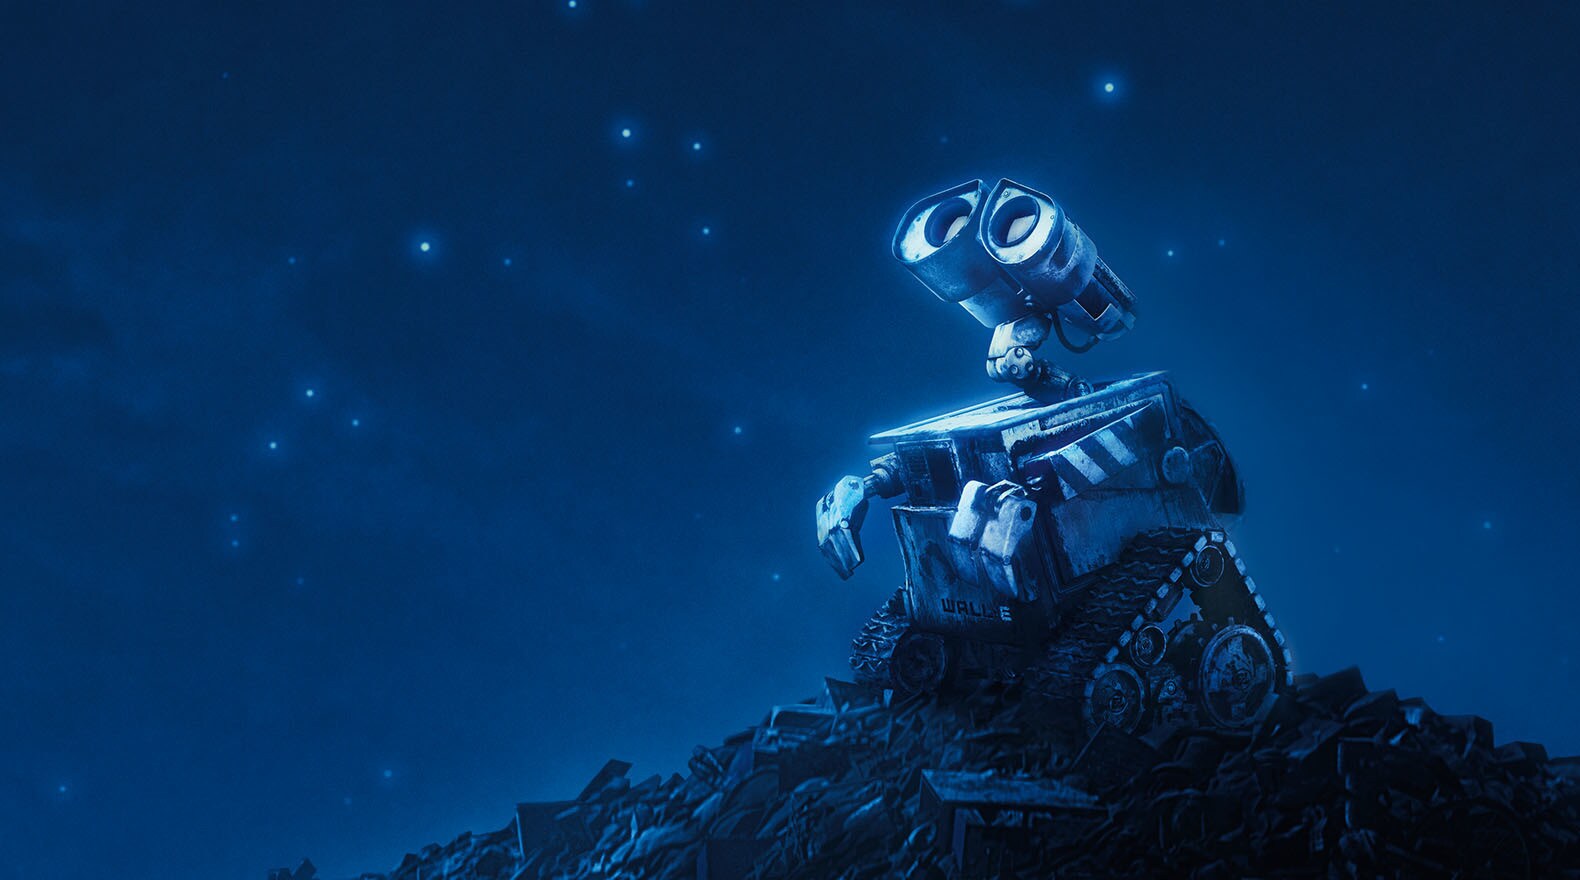 WALL•E is one of those robots who has a hard time keeping his head out of the clouds. From the movie "Wall-E"